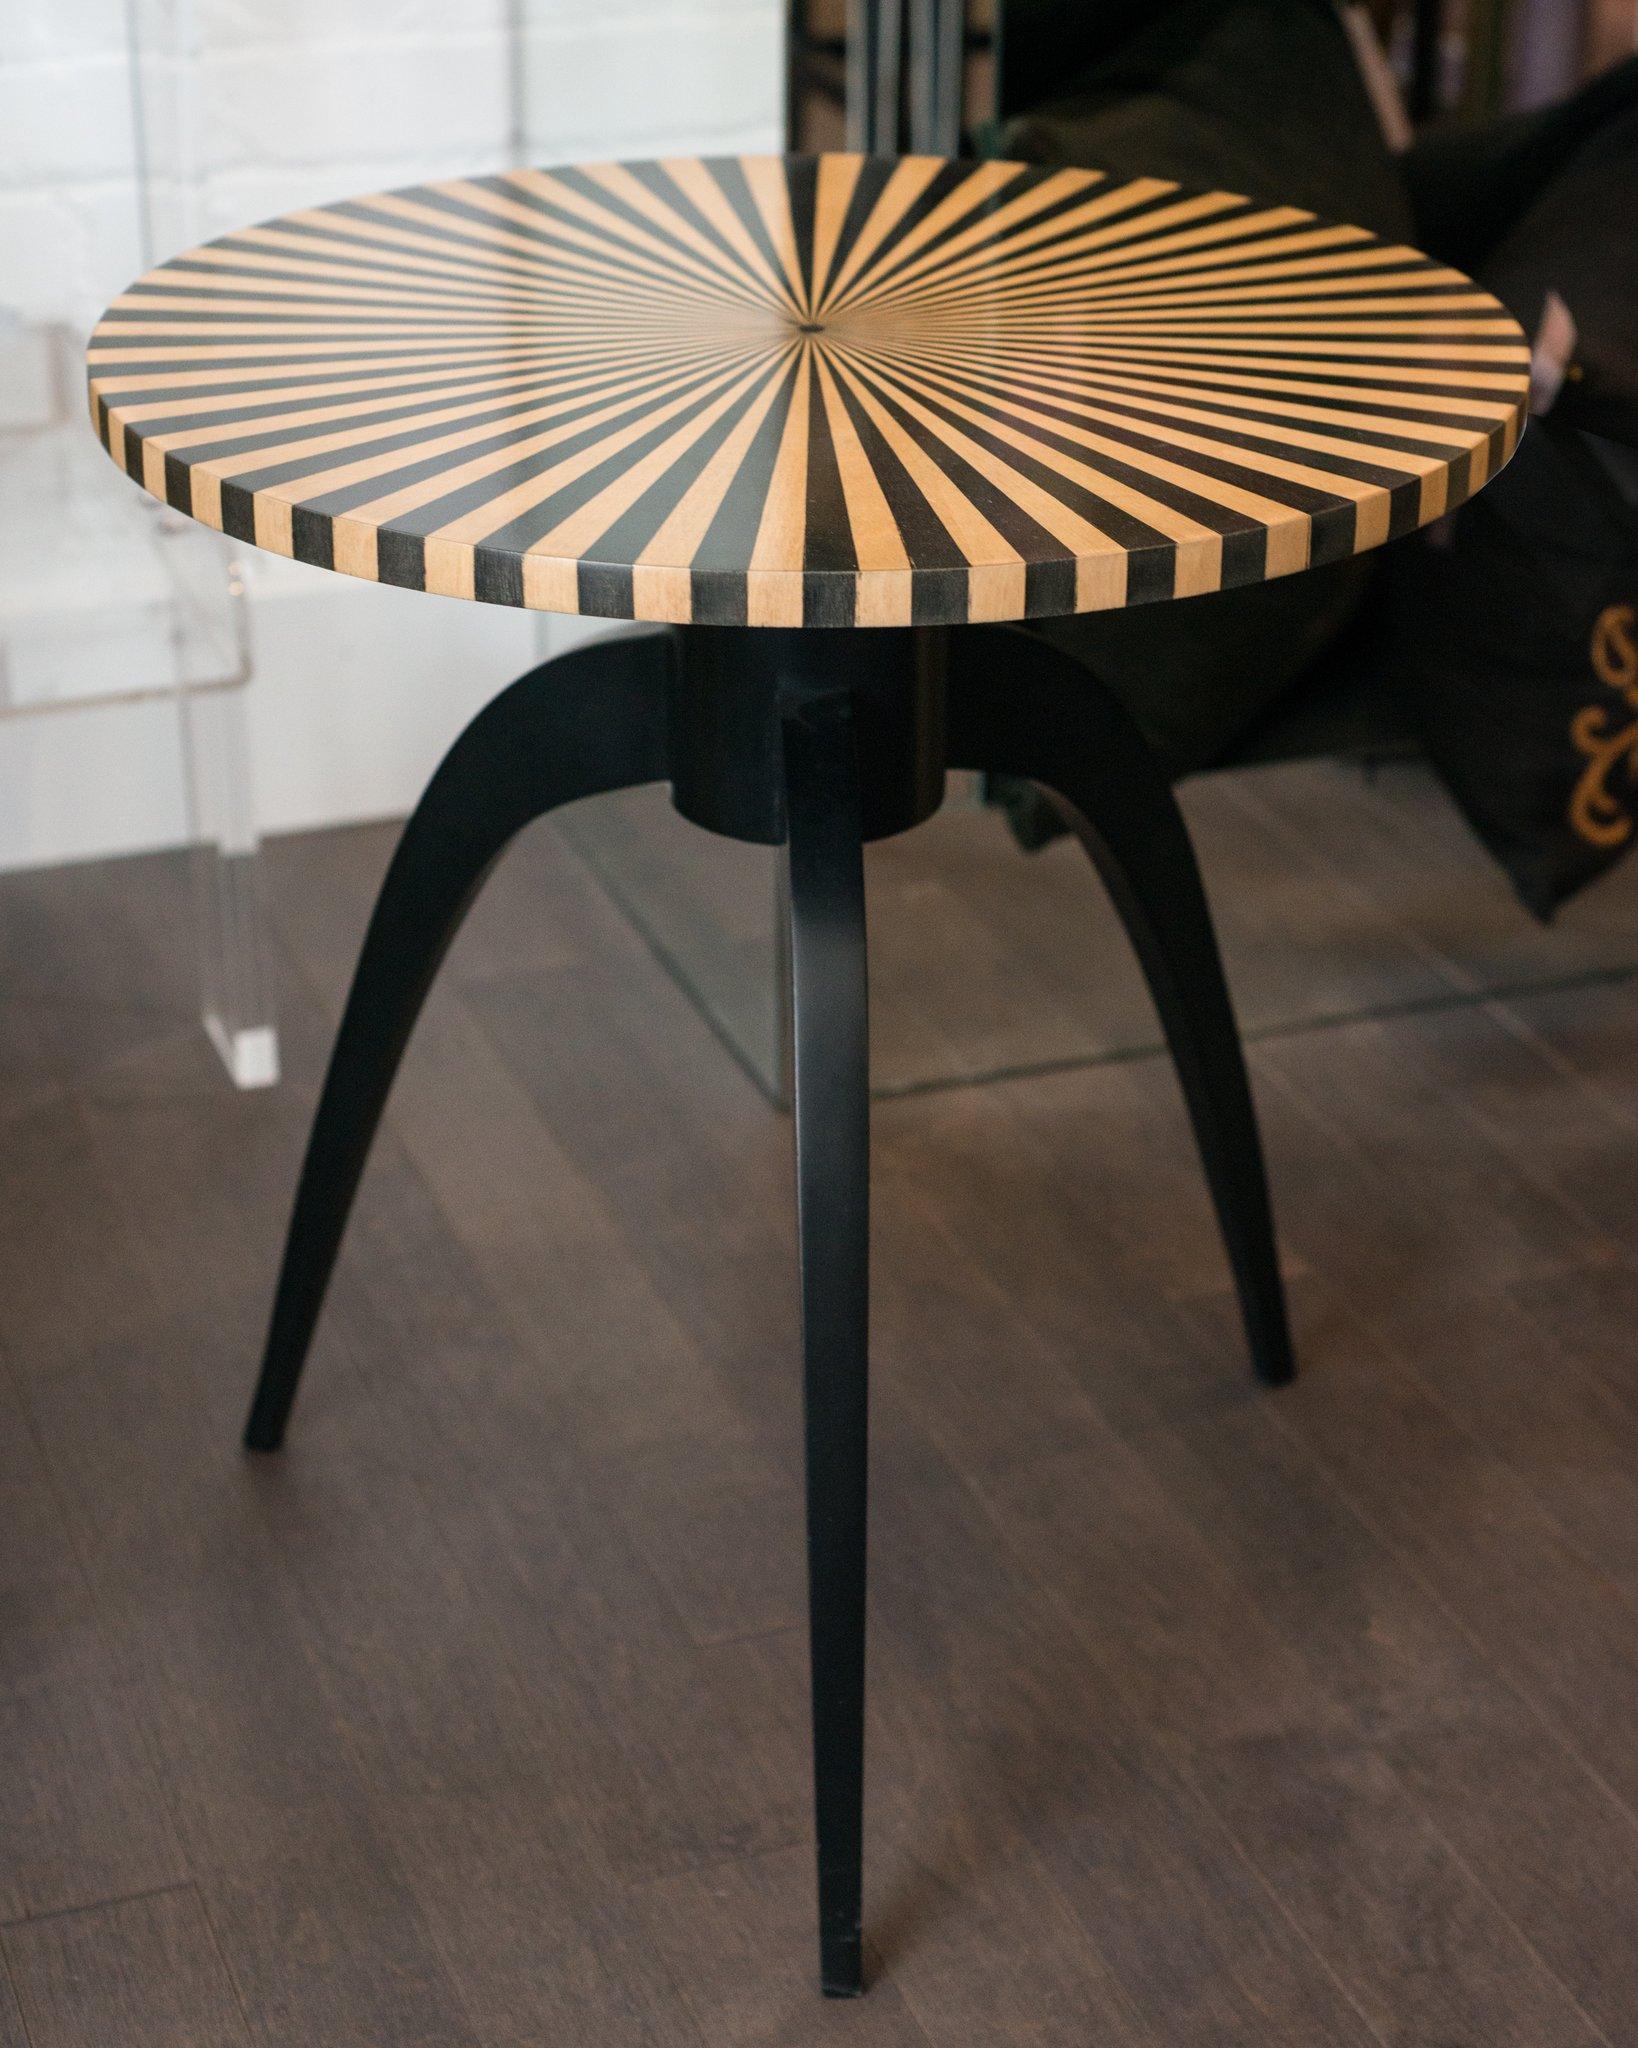 A beautifully made contemporary table in inlaid satinwood, a nod to Fornasetti. Alternating inlaid panels create a strong geometry in a natural tone.